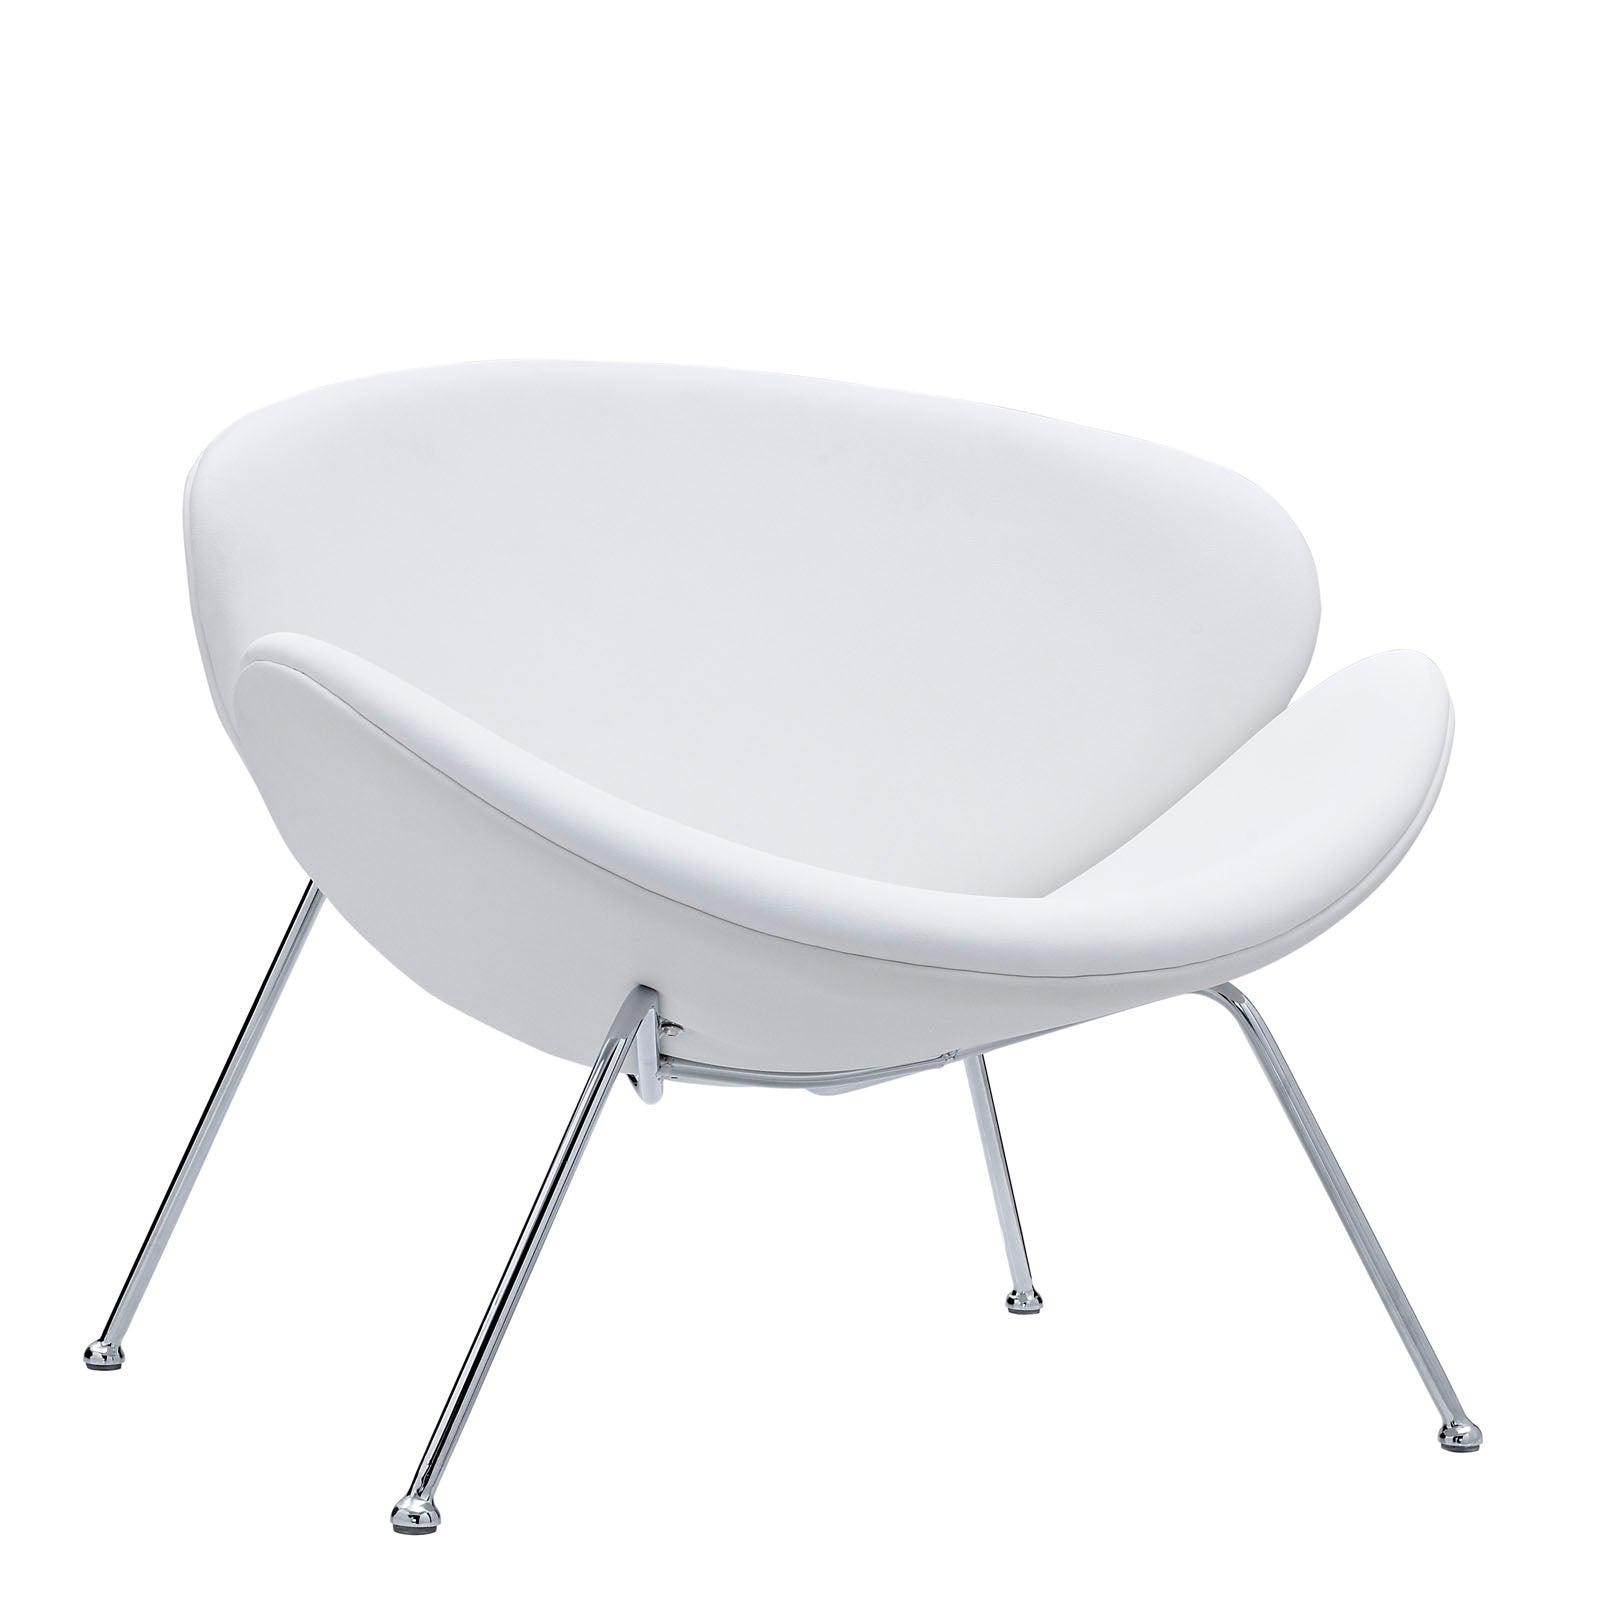 Modway Accent Chairs - Nutshell Upholstered Vinyl Lounge Chair White